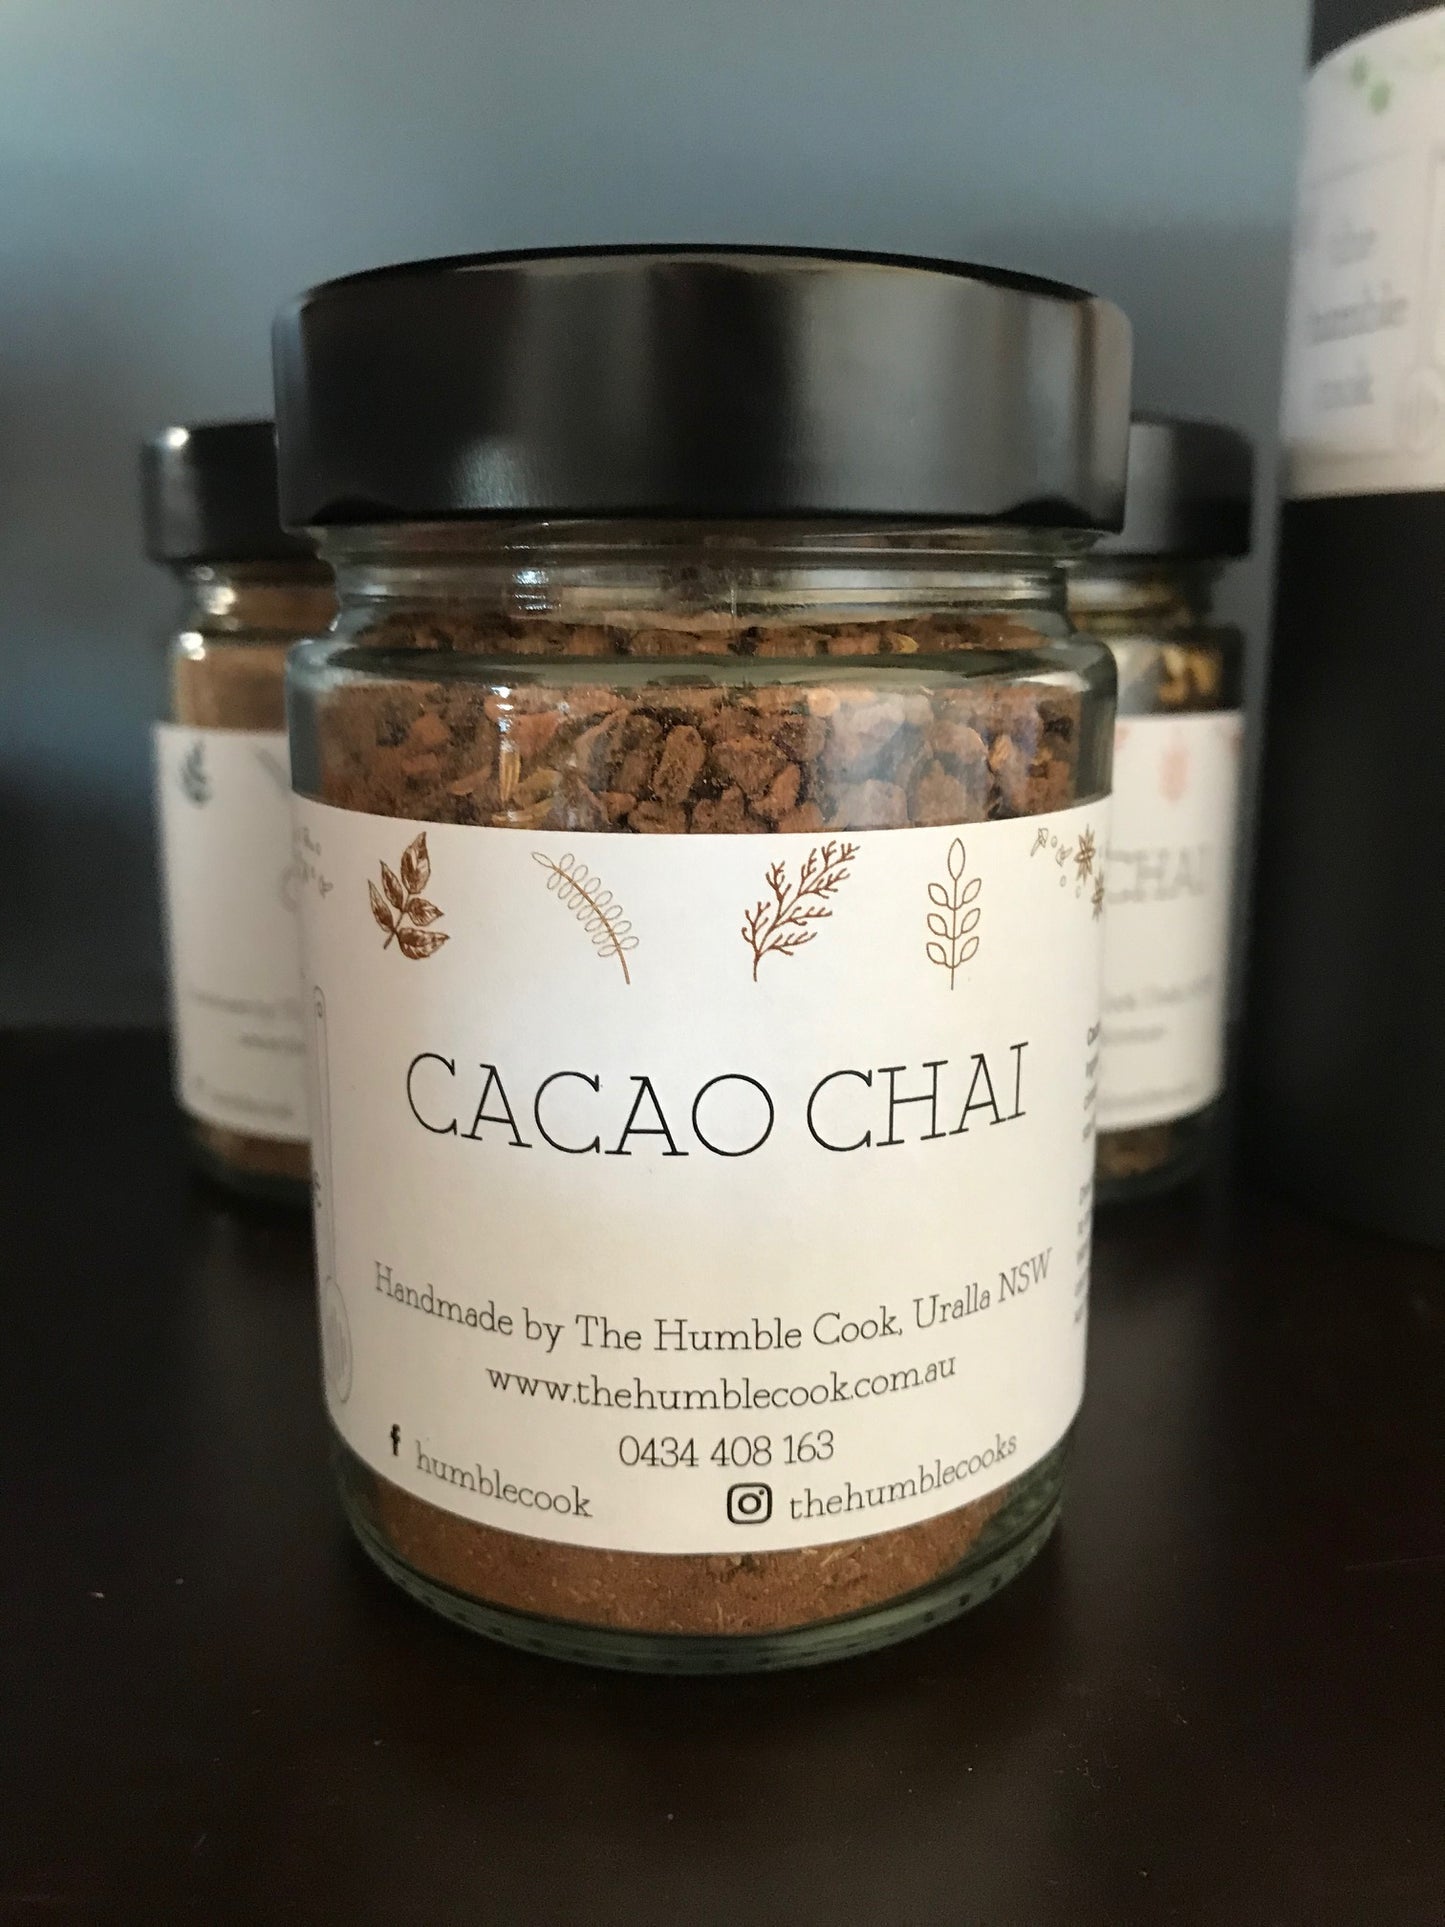 Cacao Chai by The Humble Cook